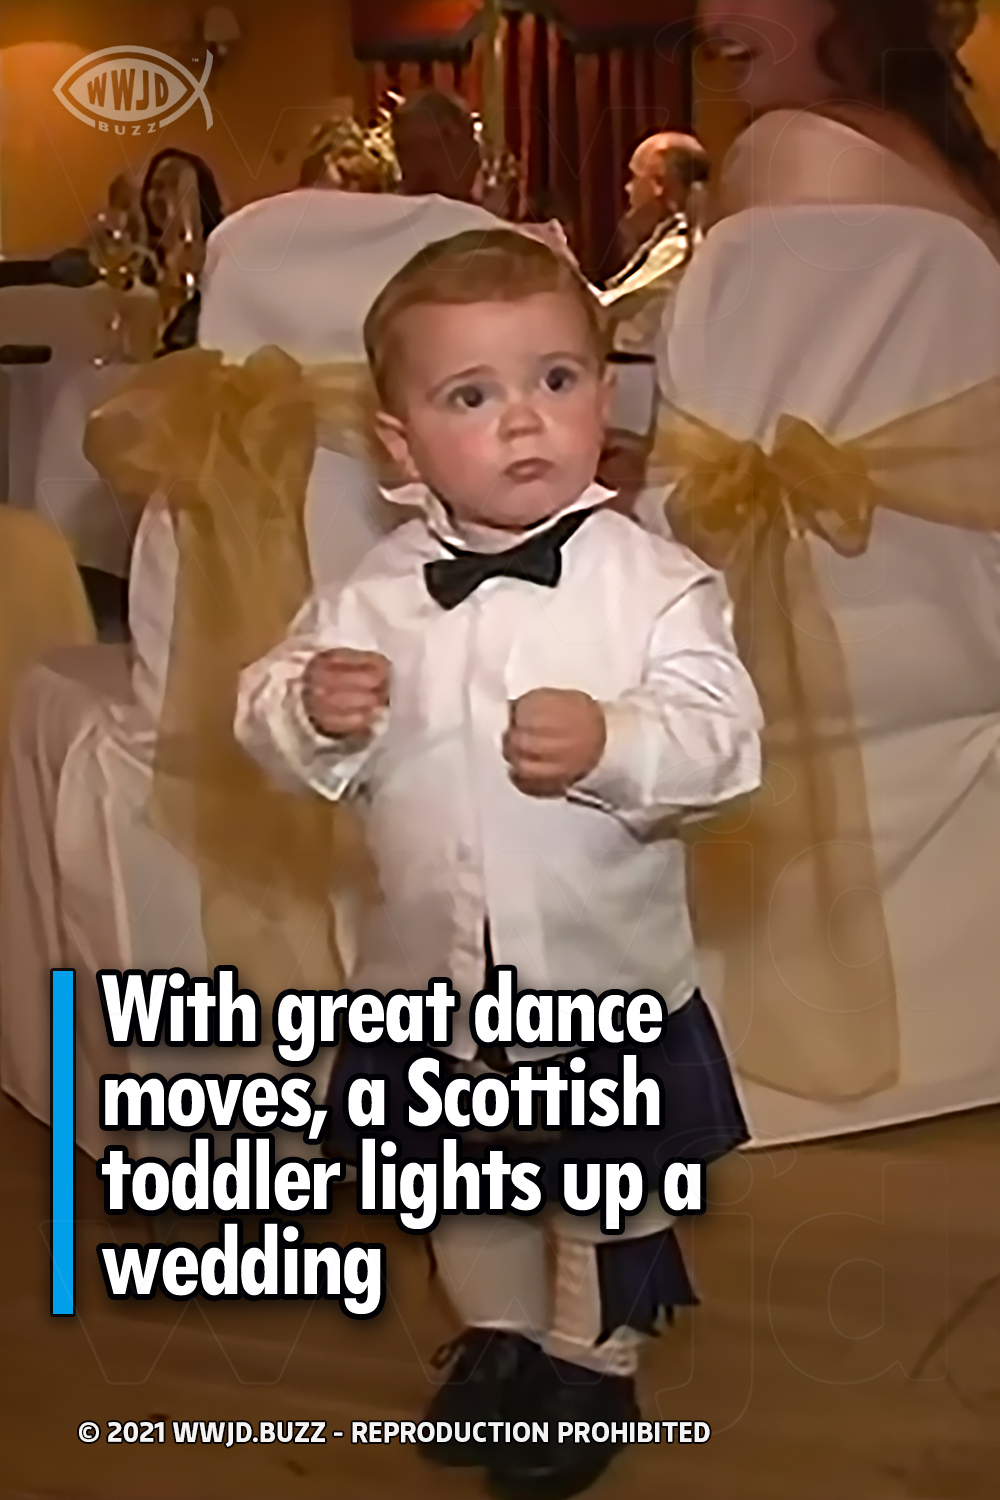 With great dance moves, a Scottish toddler lights up a wedding